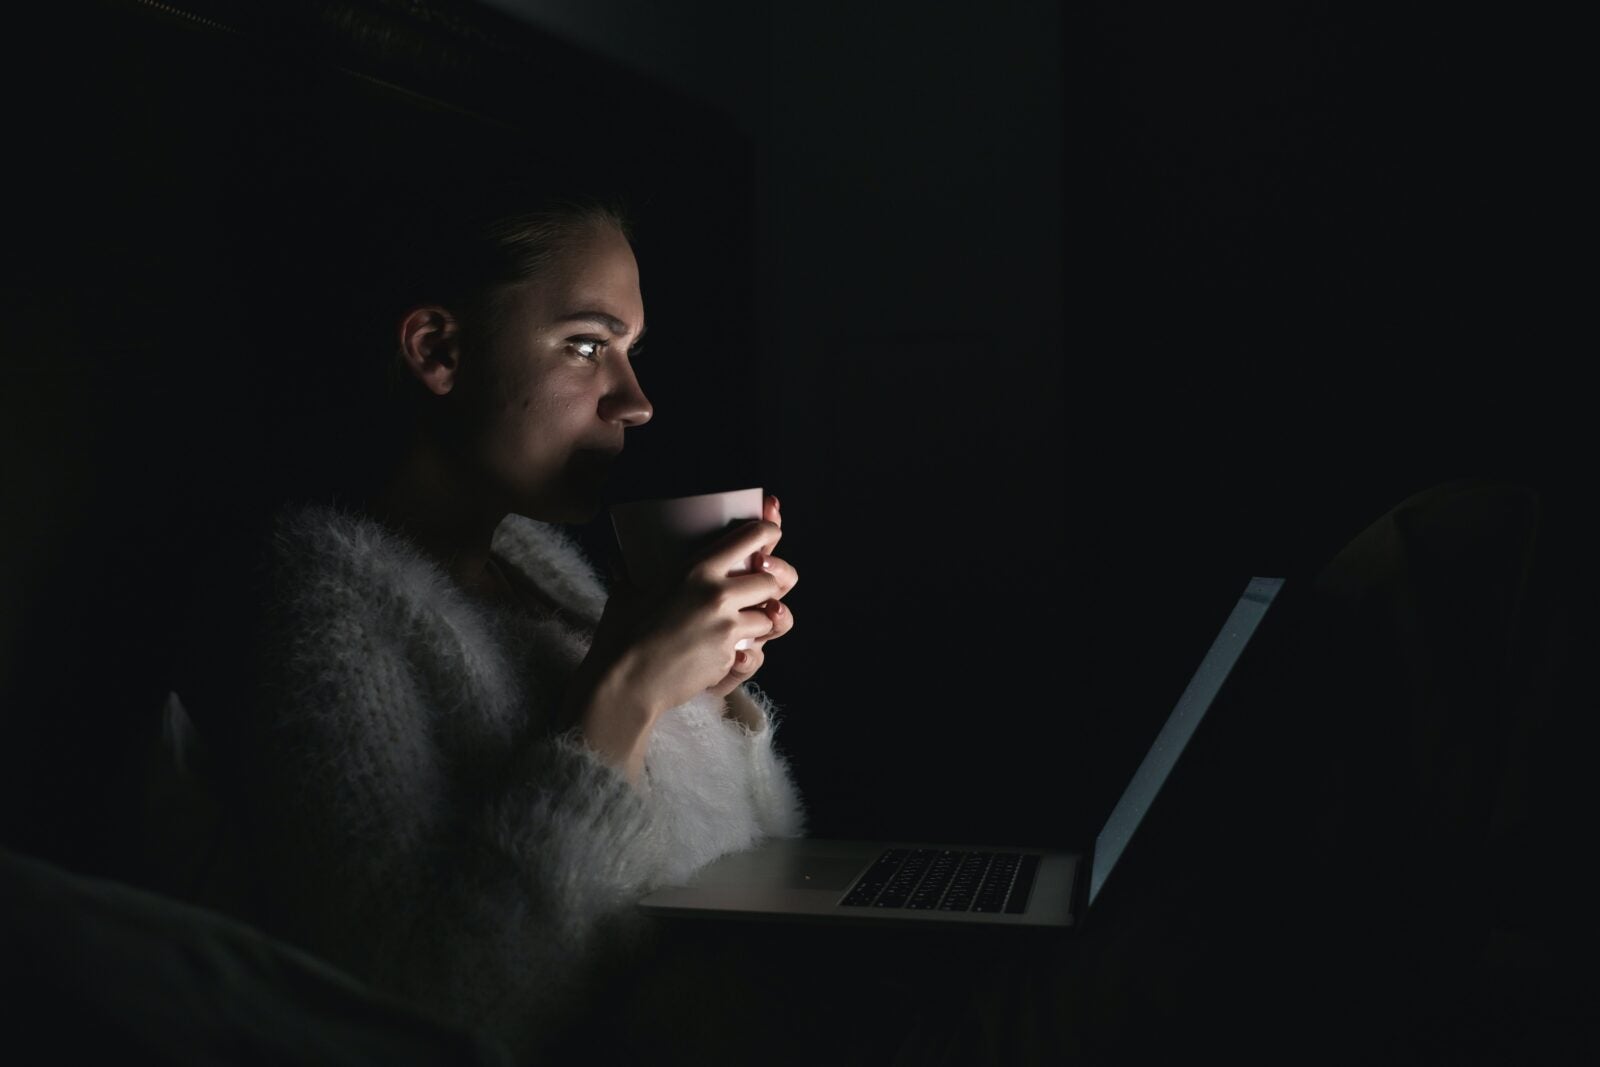 A woman sitting in the dark and drinking a cup of glass in front of her laptop.